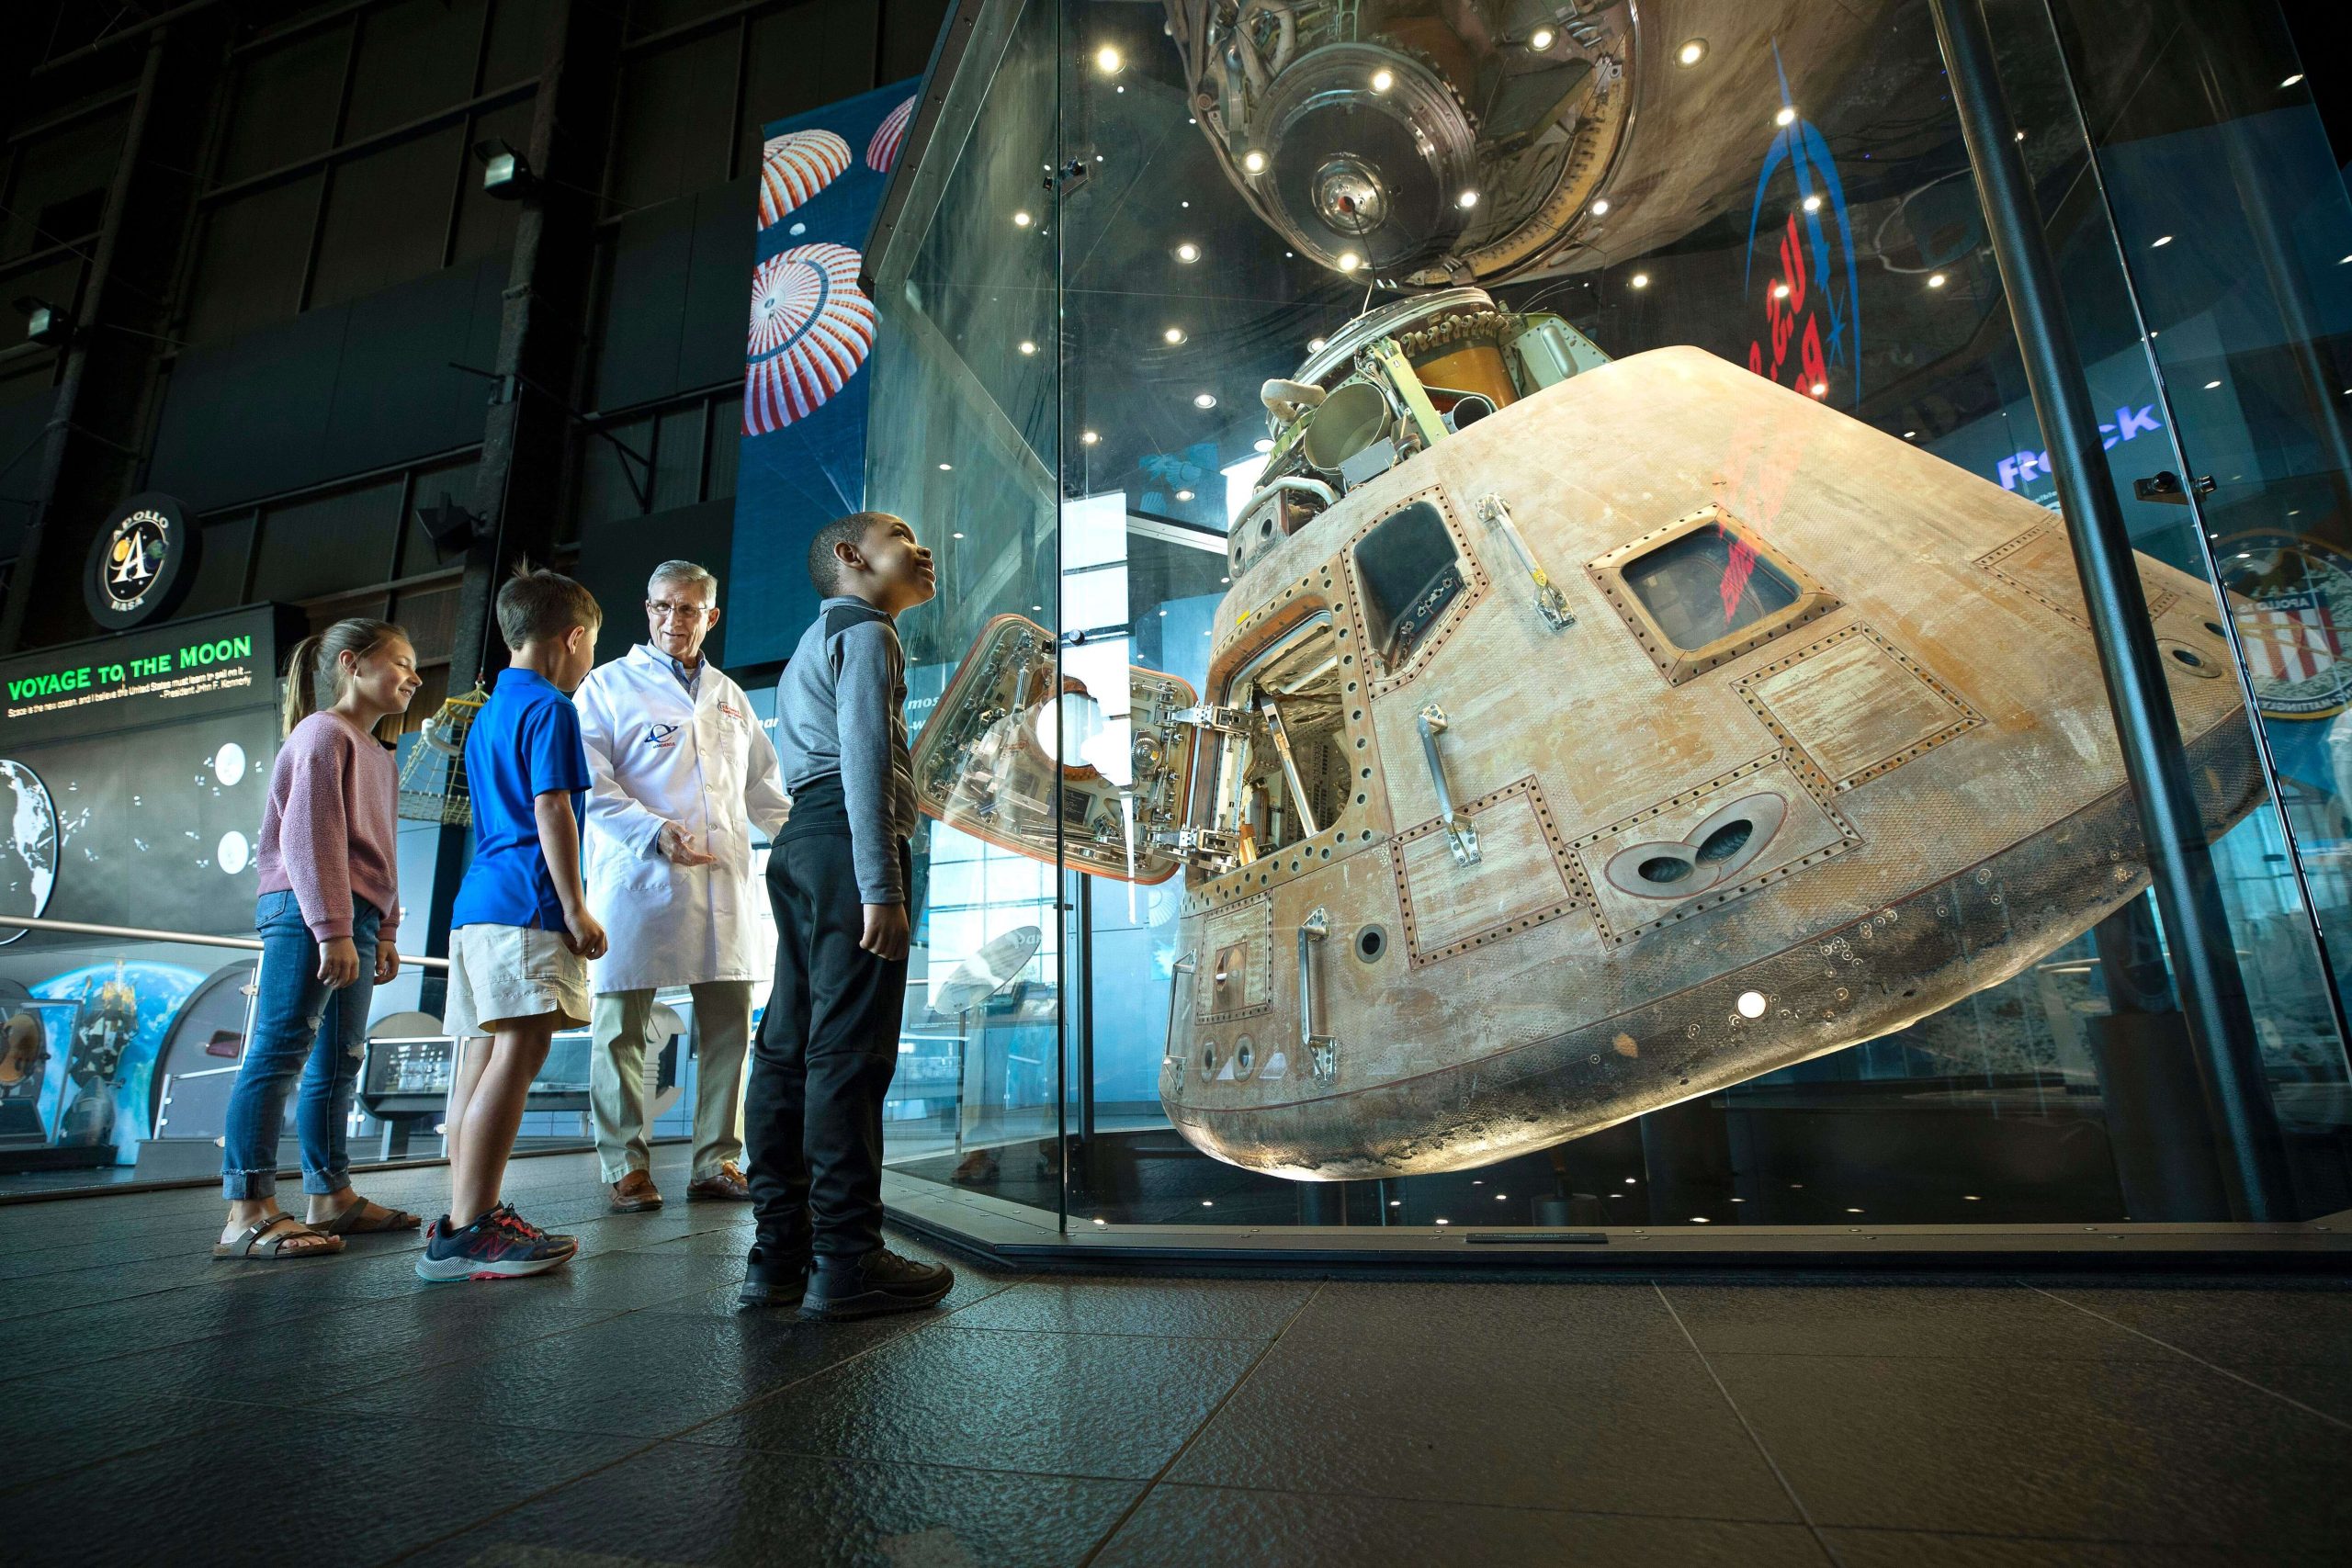 At the U.S. Space and Rocket Center, you can tour one of three existing Saturn V Rockets, train like an astronaut in their G-Force Accelerator or SCUBA underwater training session.